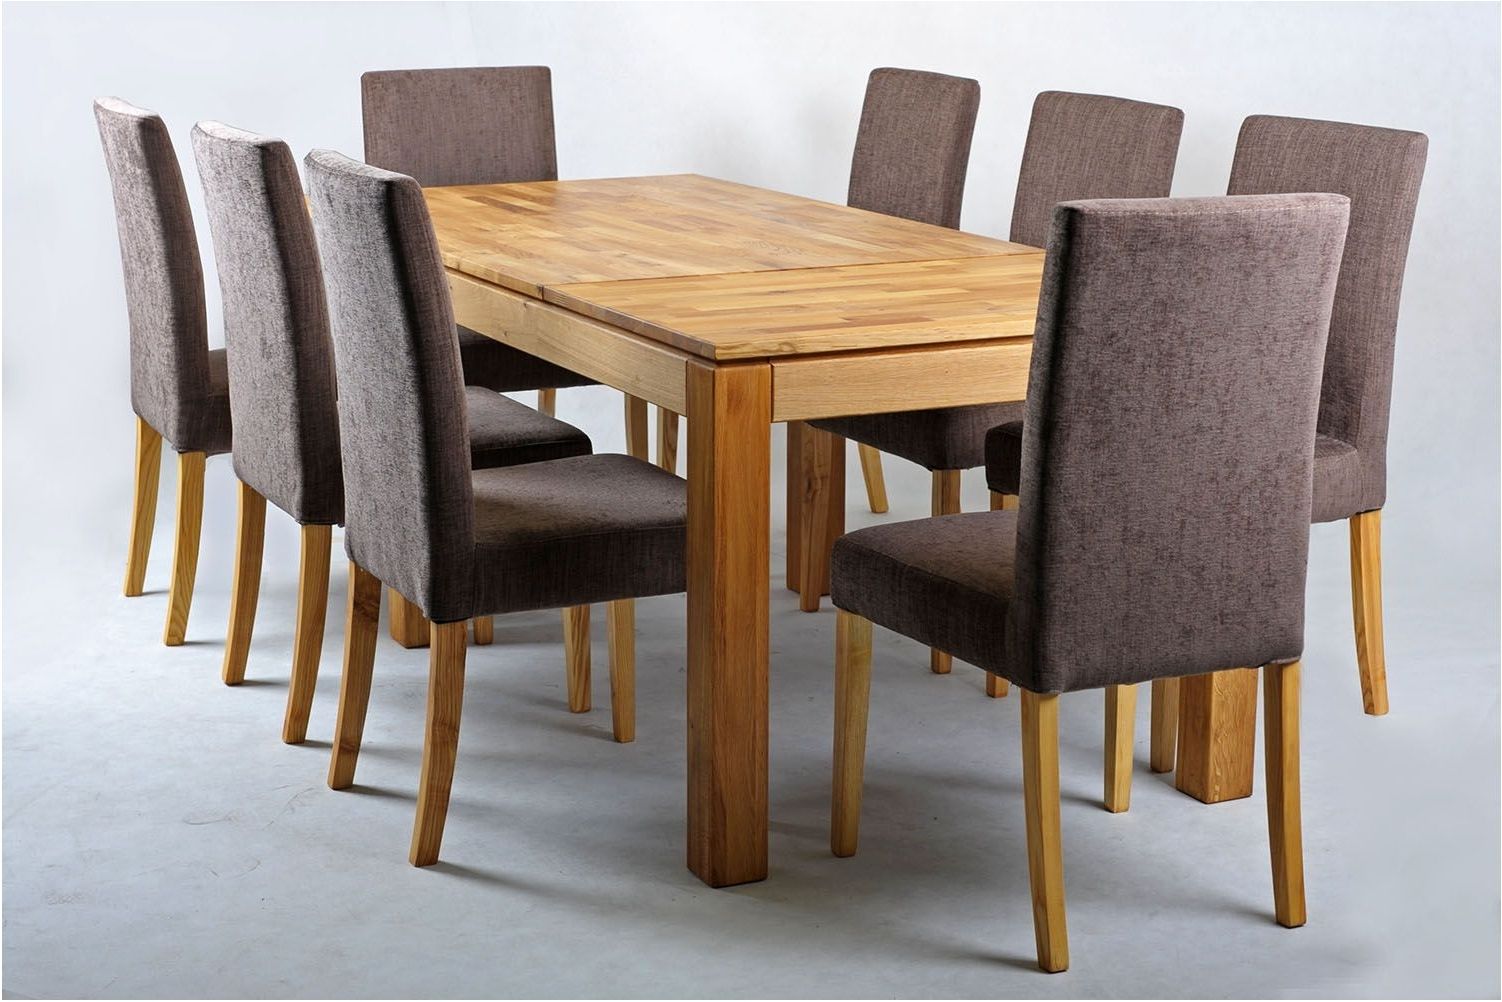 Recent Spectacular Solid Oak Extending Dining Table And Chairs Set Home Regarding Oak Extending Dining Tables And Chairs (View 1 of 25)